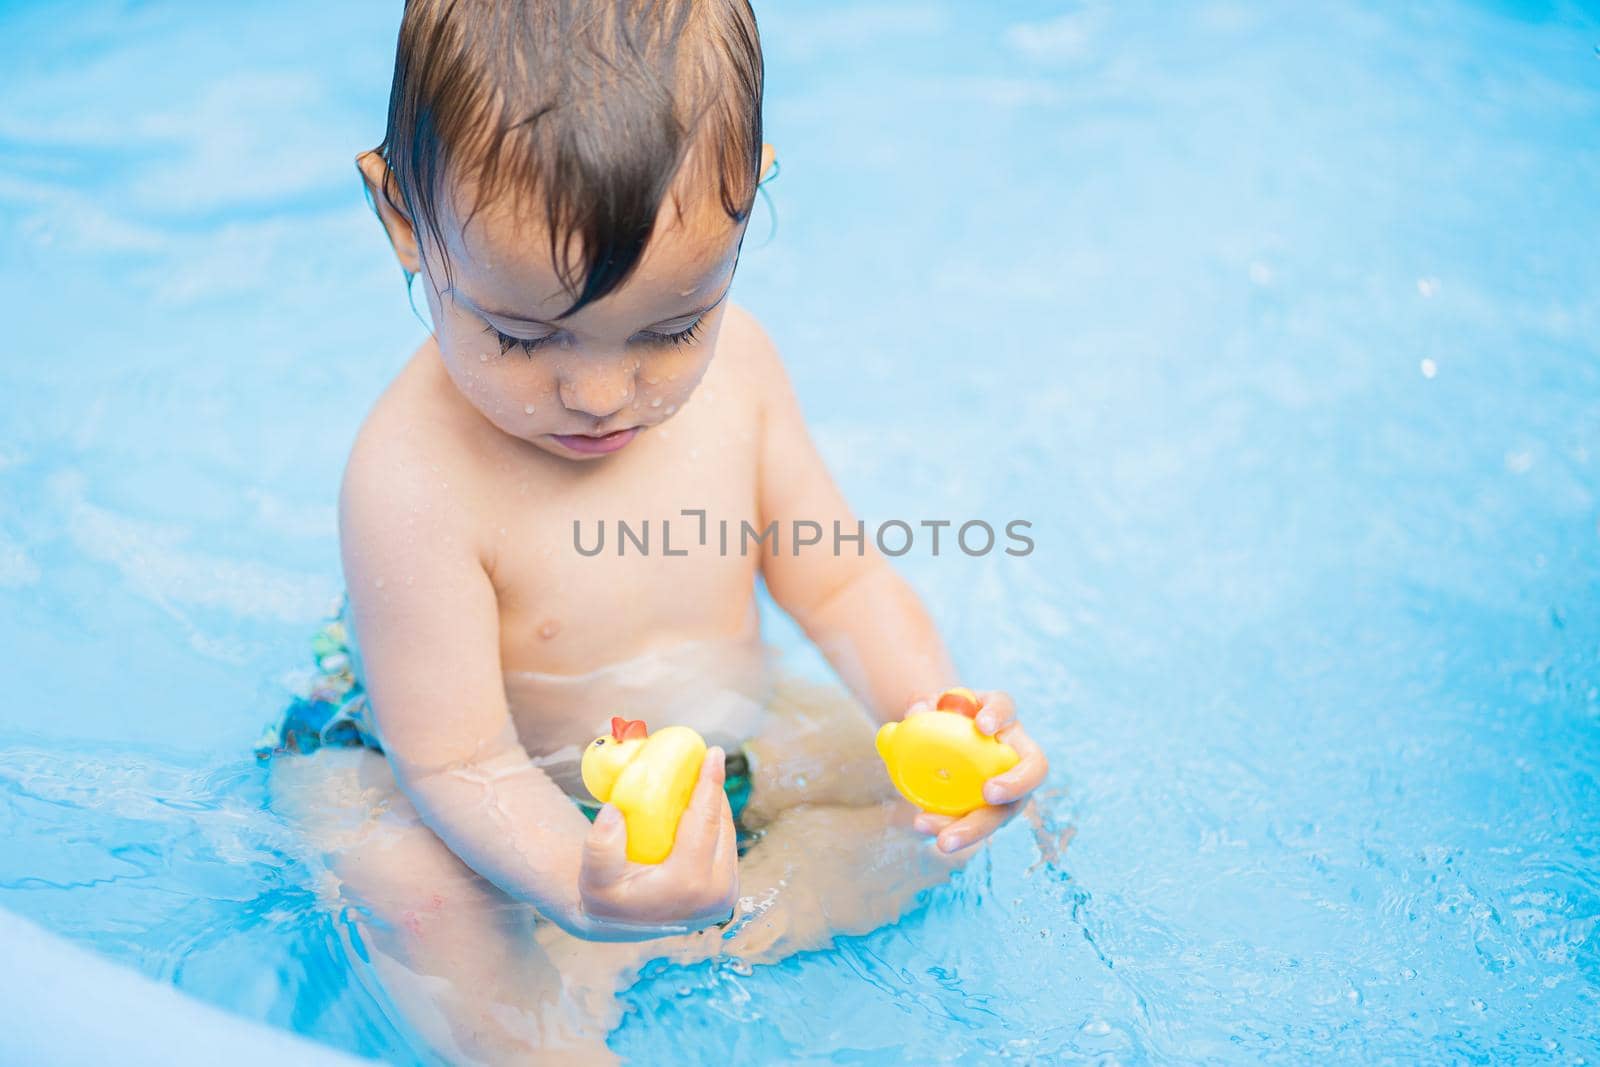 Cute little child bathing with duck in blue street pool in courtyard. Portrait of joyful toddler, baby. Kid laughs, splashes water, smiles. Concept of healthy lifestyle, family, leisure in summer by kristina_kokhanova